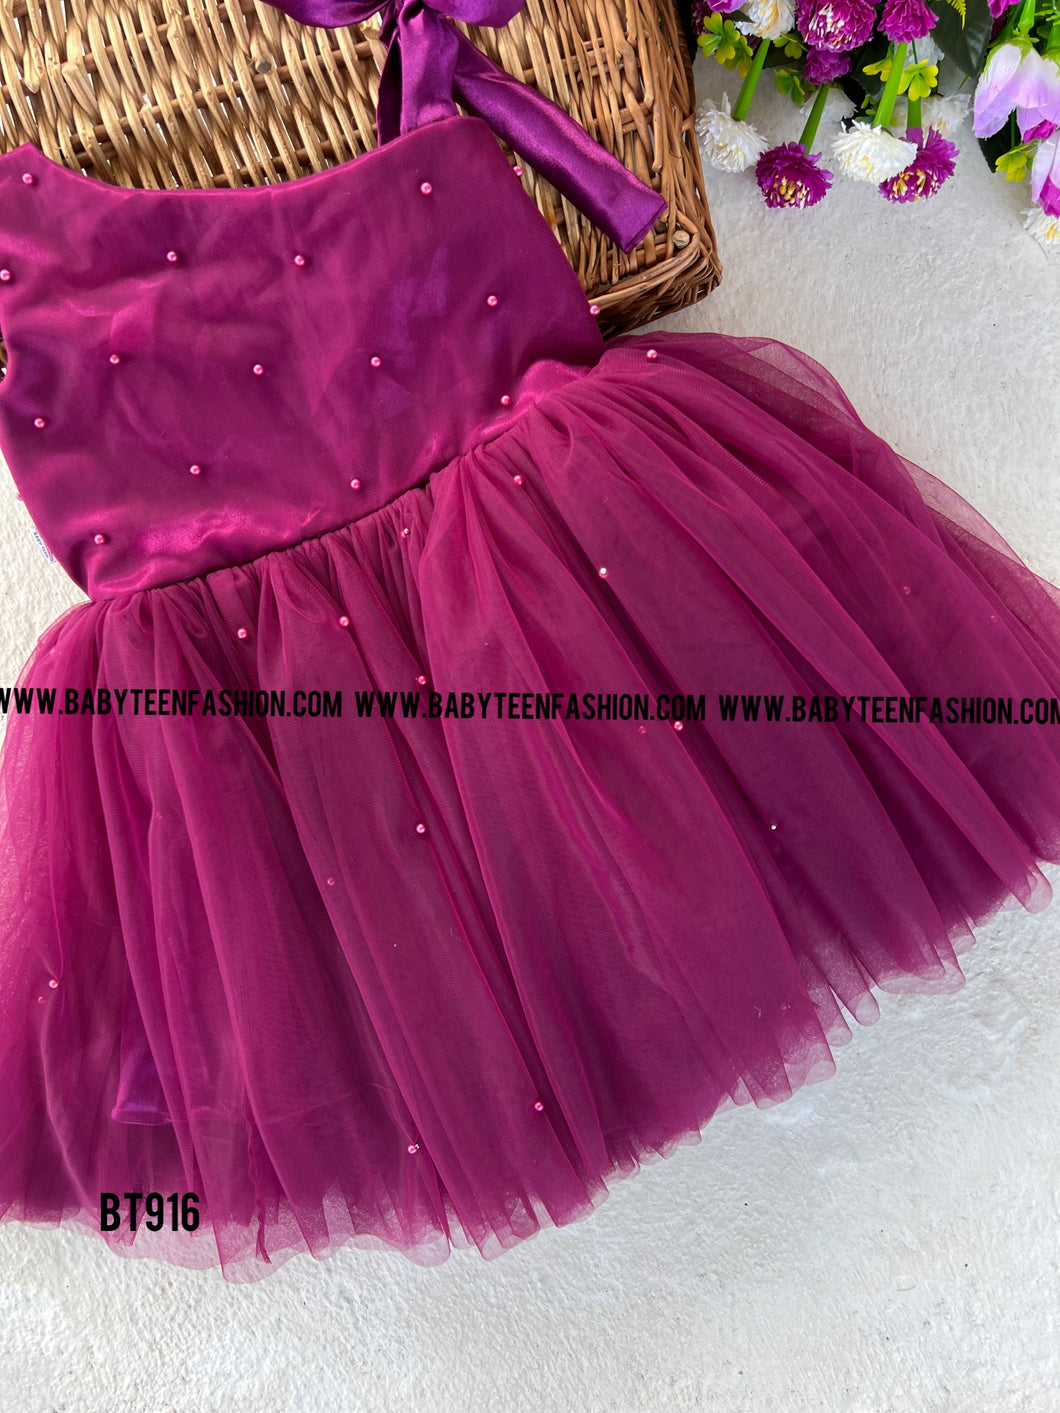 BT916 Radiant Princess Party Dress - Your Little Star Will Shine